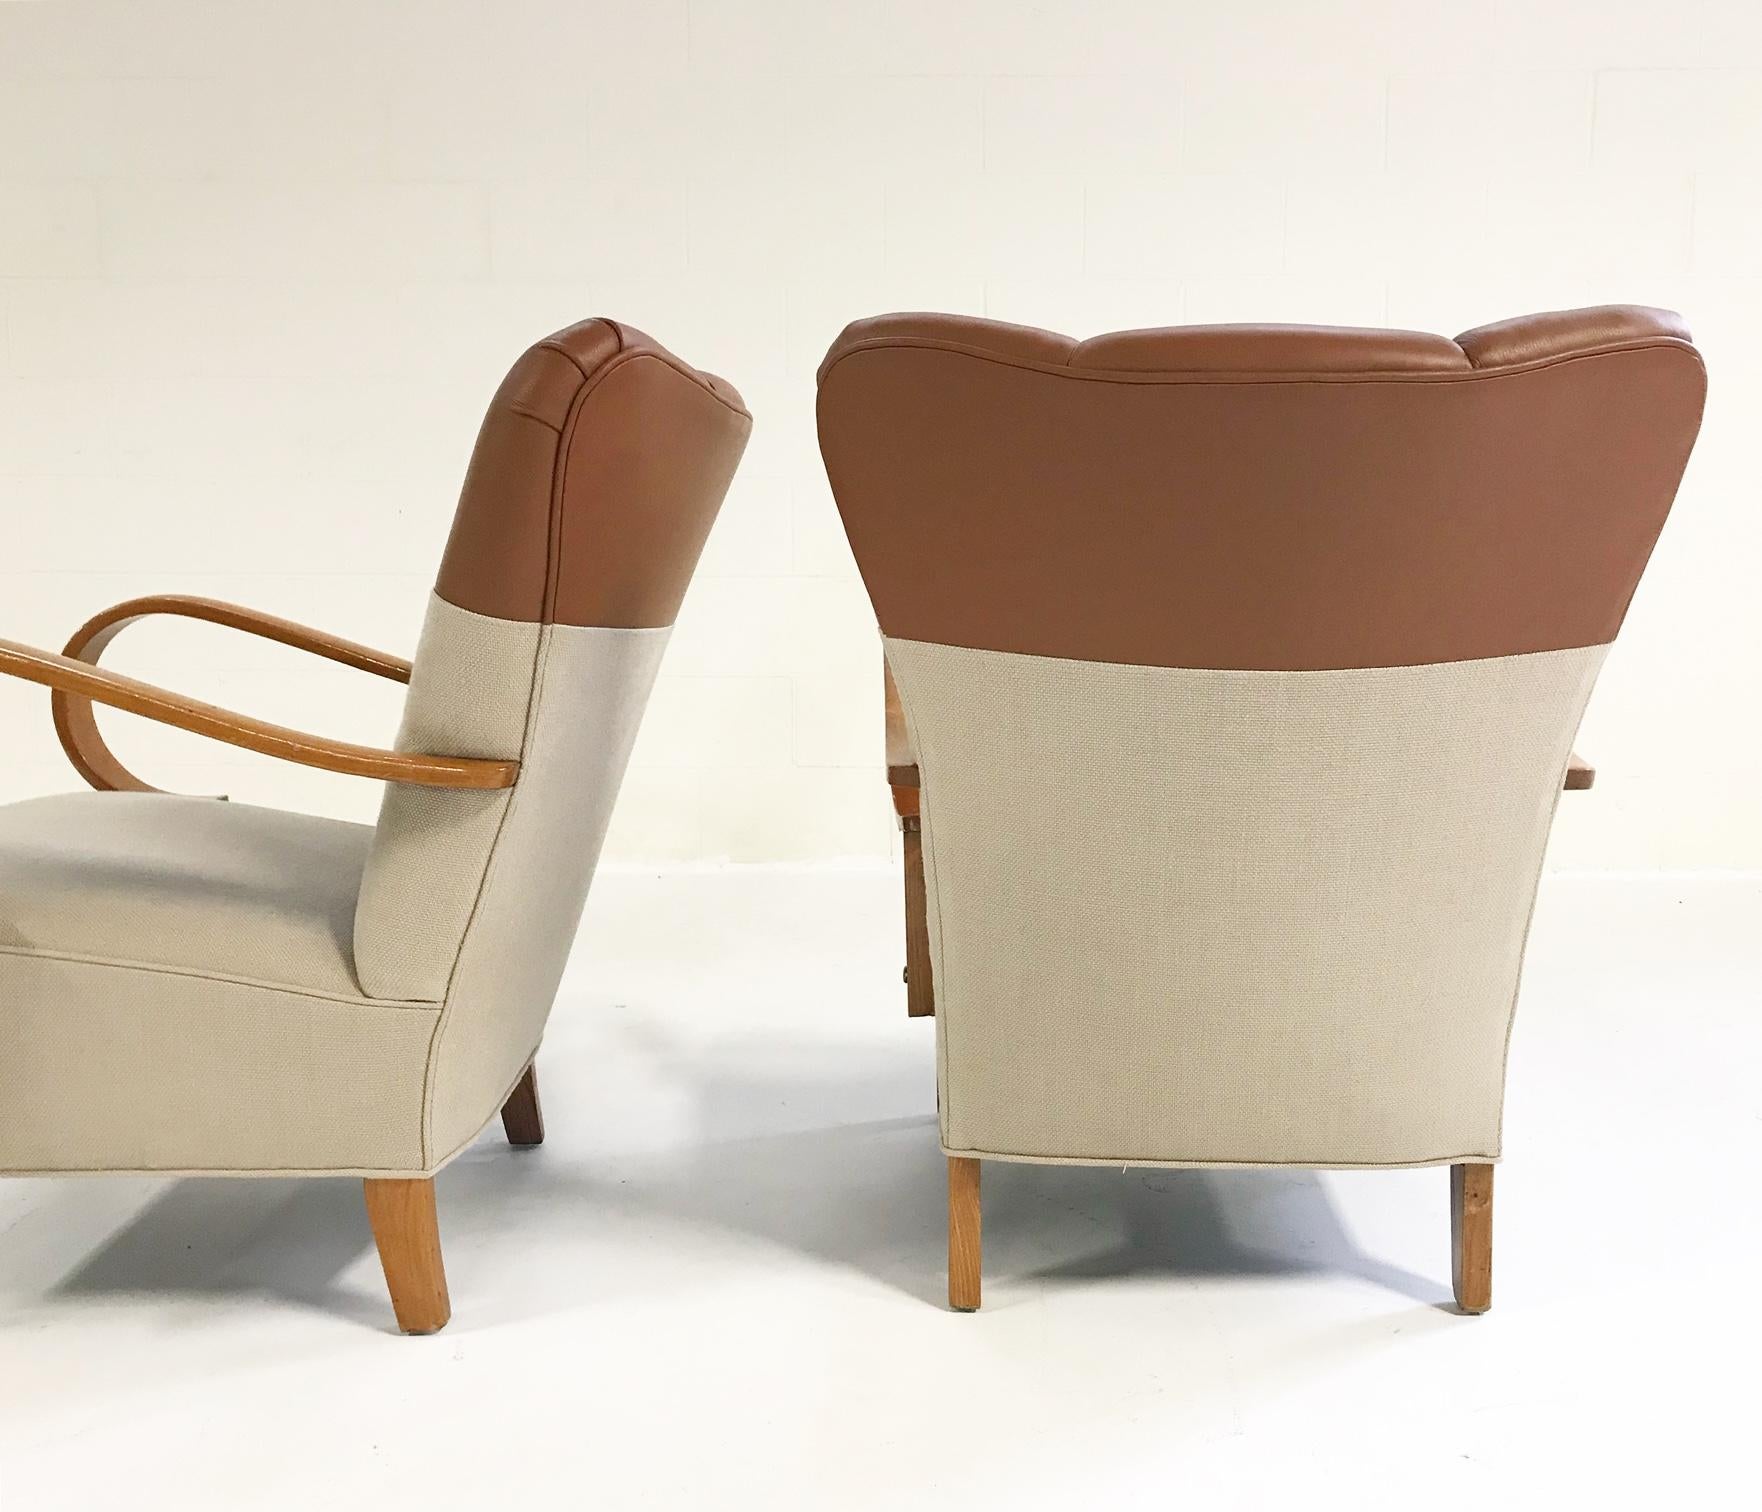 20th Century 1970s, Italian Bentwood Armchairs Restored in Loro Piana Leather and Linen